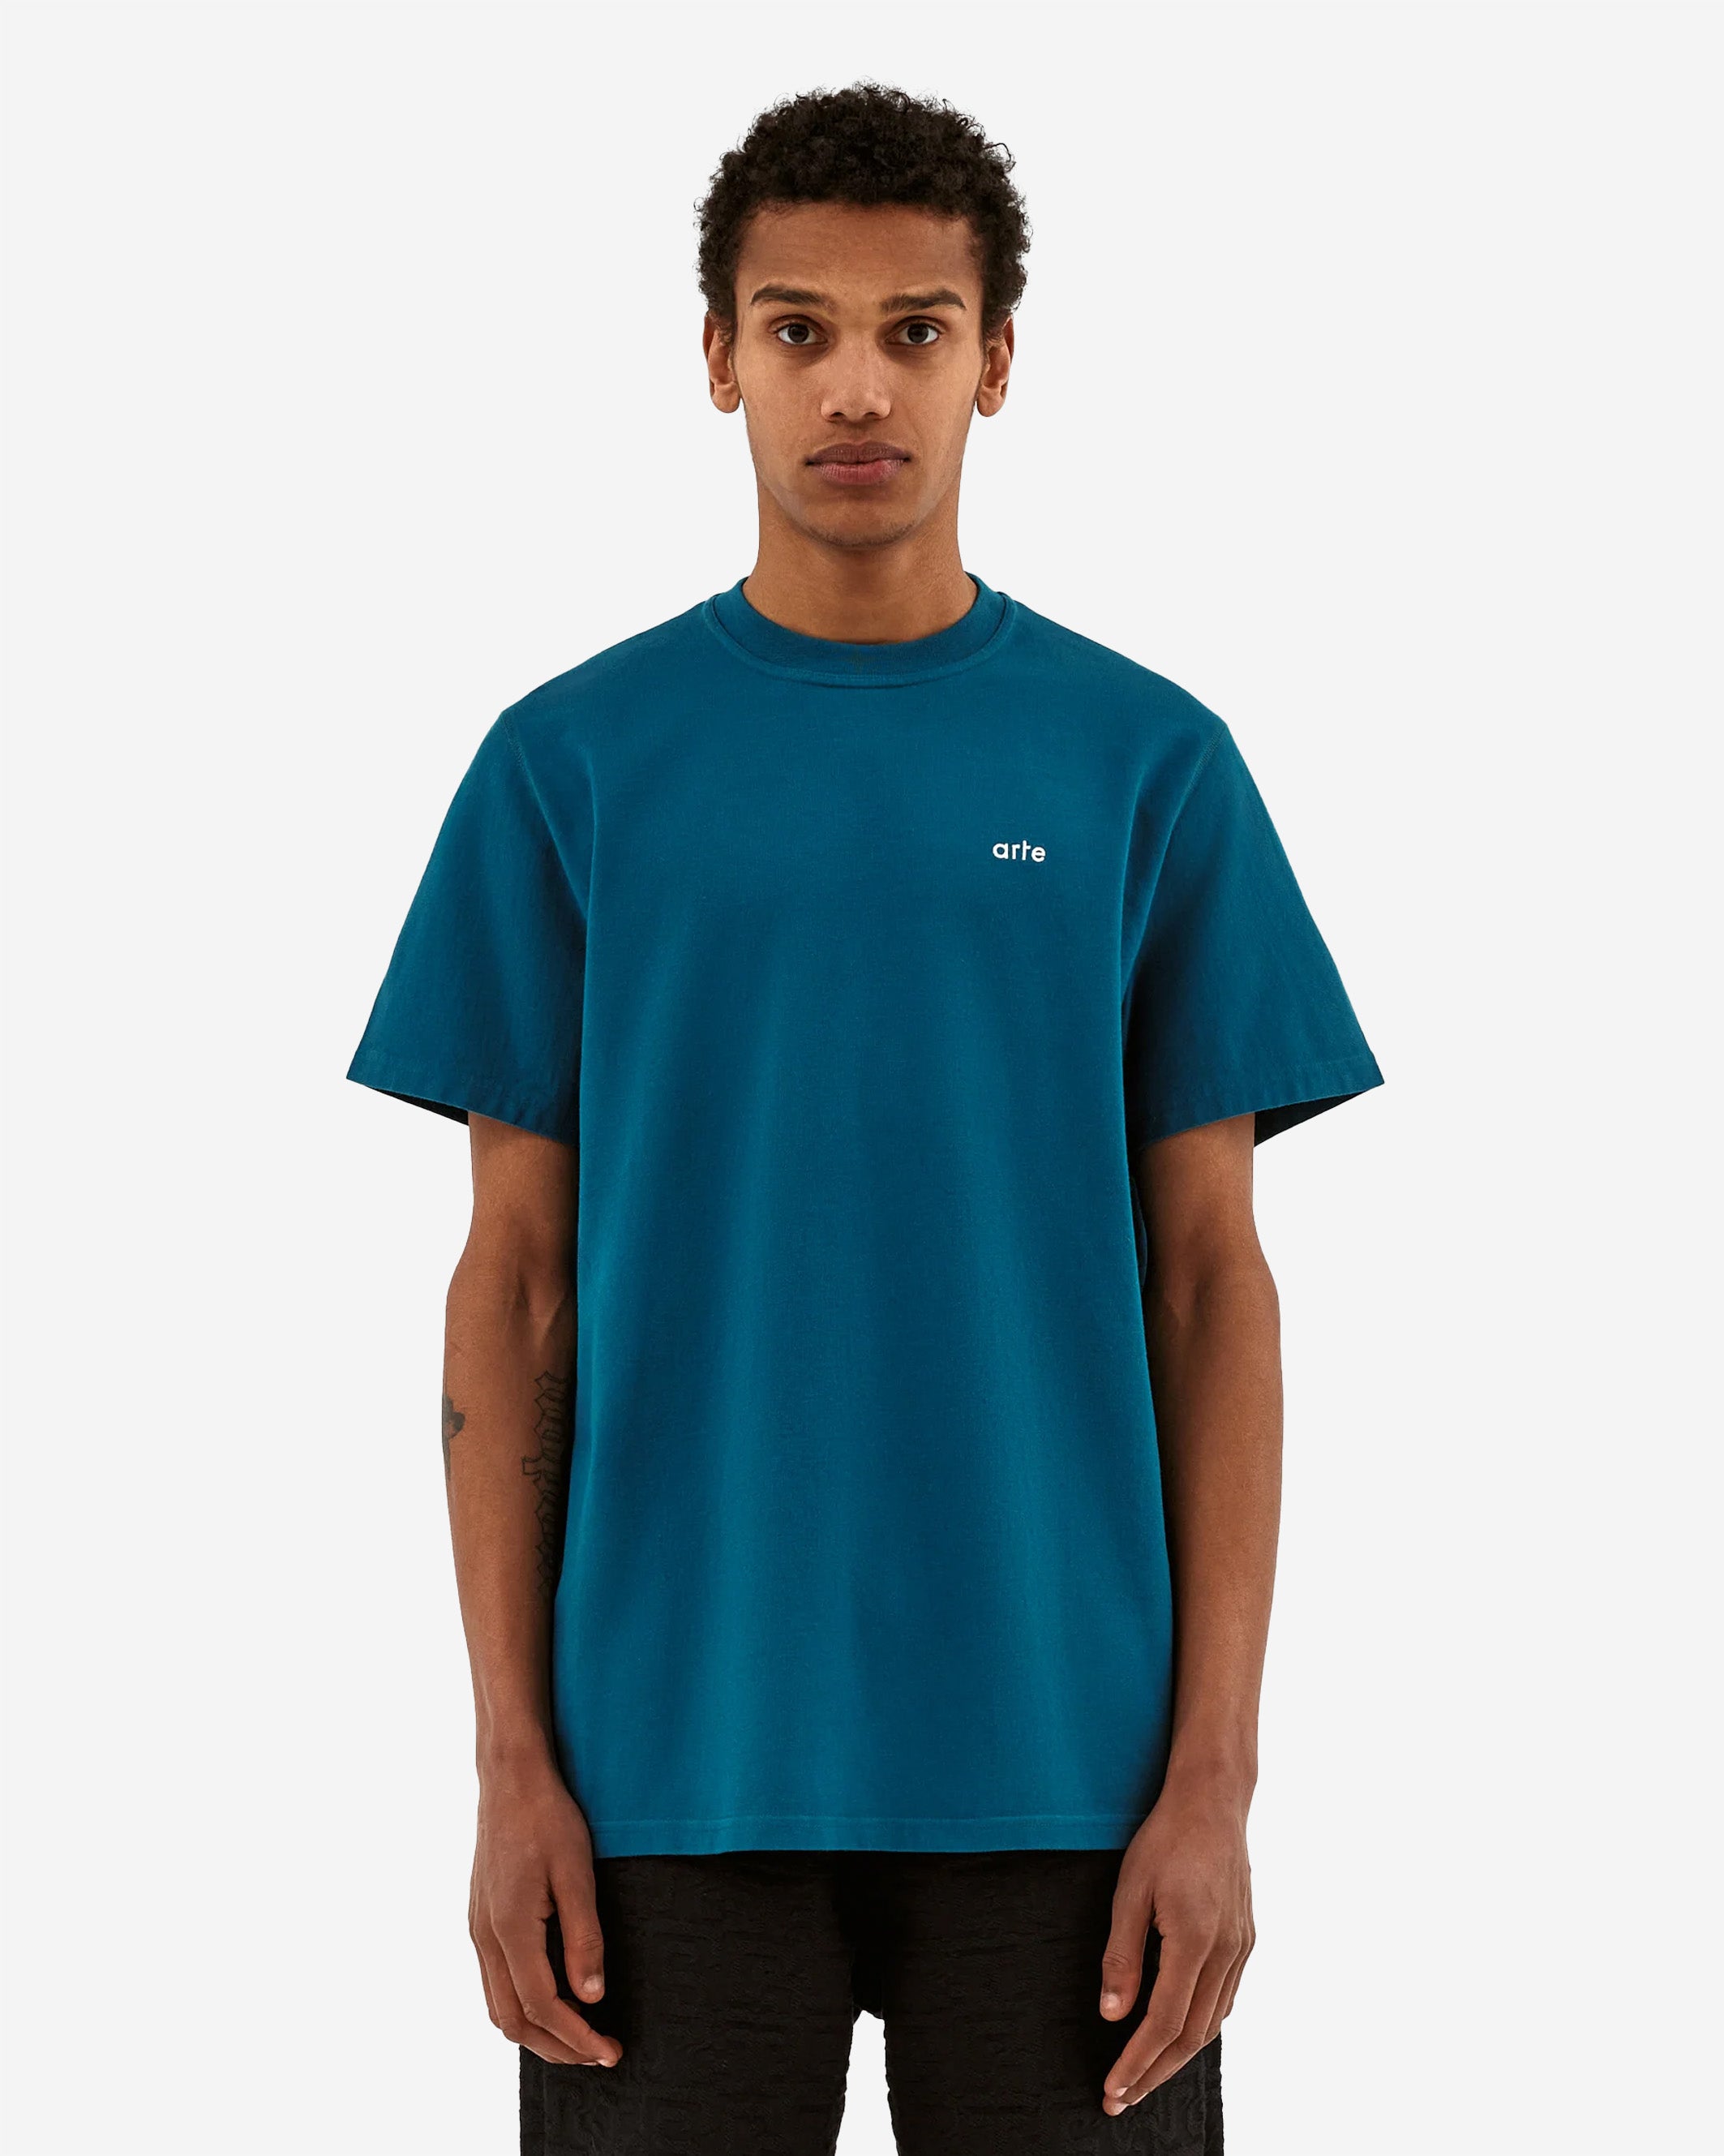 The Tommy Back Dancers T-shirt in petrol blue is this season's interpretation of Arte's signature graphic t-shirt. Made from premium cotton, the t-shirt features a graphic seasonal print on the back as well as the Arte logo embroidered on the left side of the chest. It has a slightly higher neck and is cut in a relaxed fit.